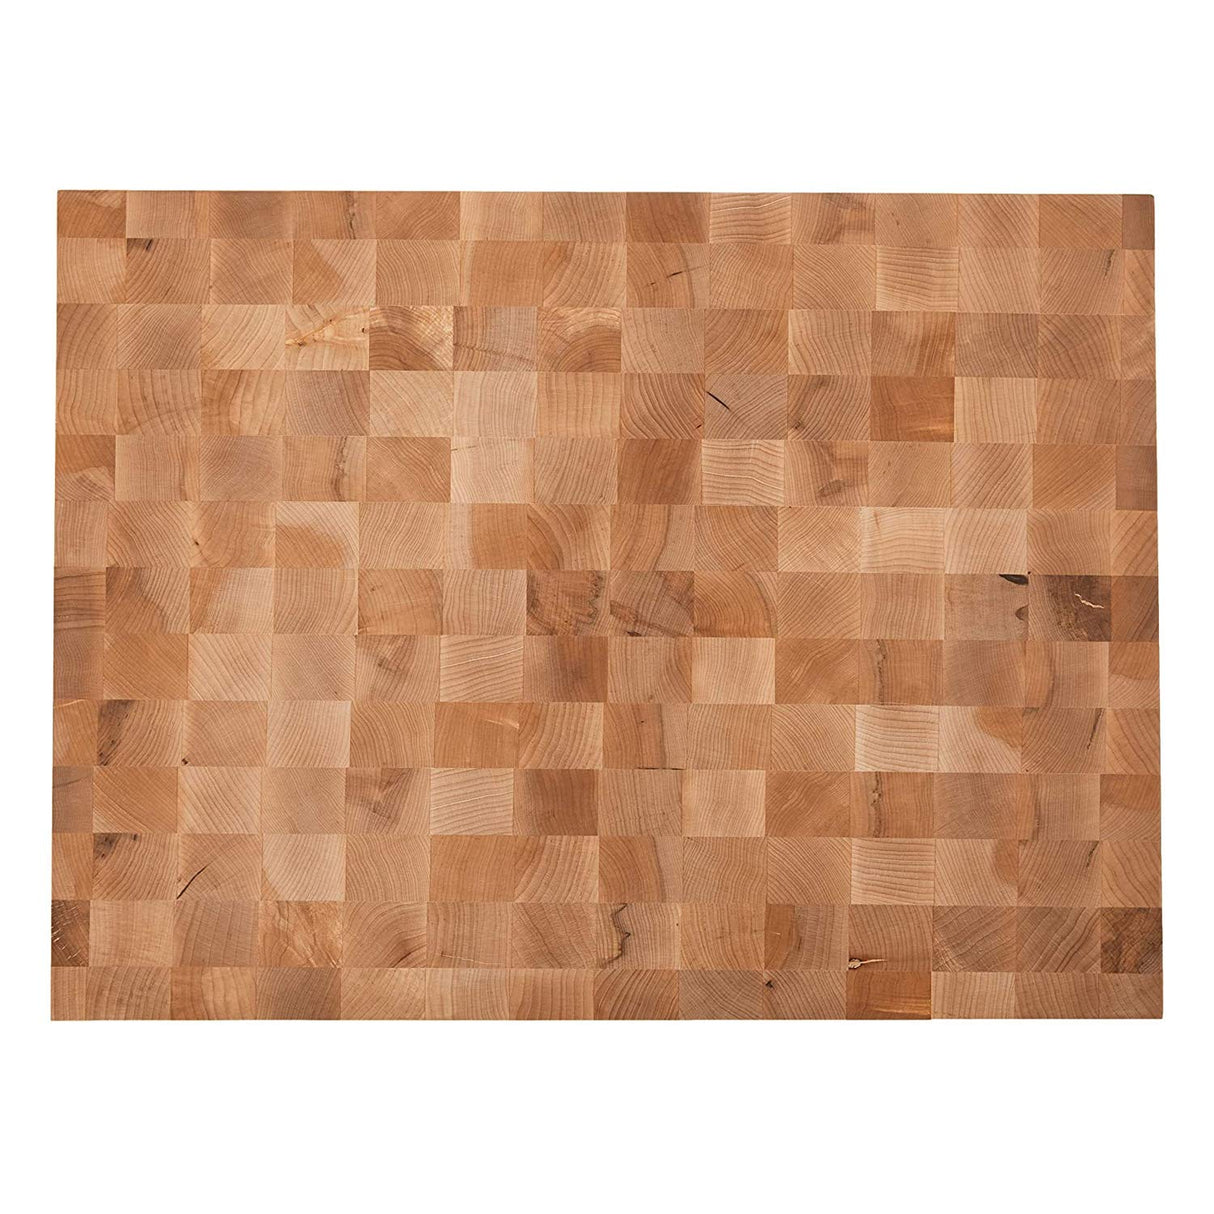 John Boos CCB2418-225 Small Maple Wood Cutting Board for Kitchen 24 x 18 Inches, 2.25 Inches Thick Reversible End Grain Charcuterie Block with Finger Grips 24X18X2.25 MPL-END GR-REV-GRIPS